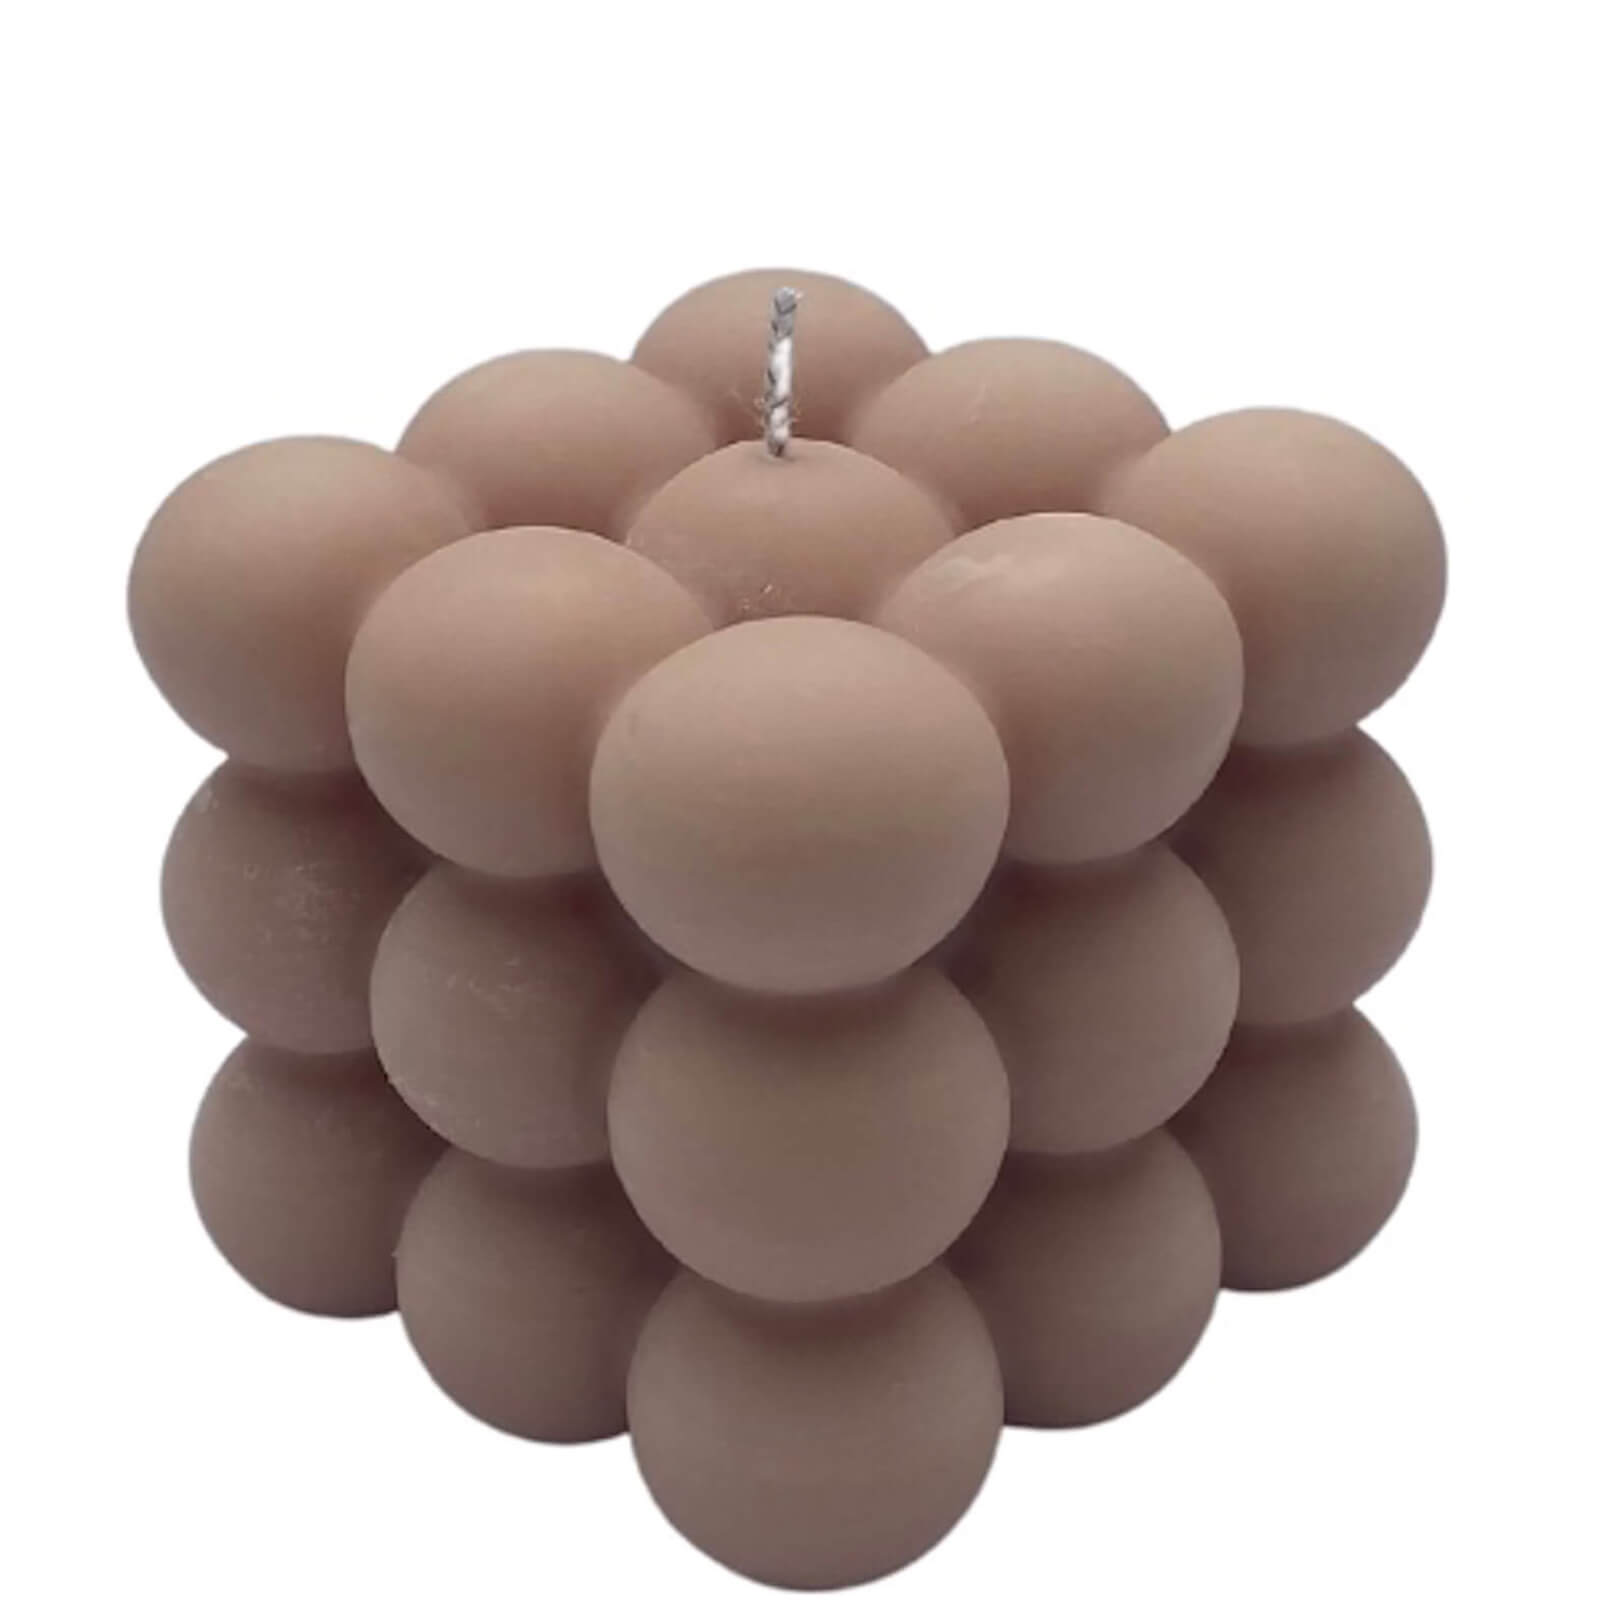 FOAM HOME Bubble Candle - Nude